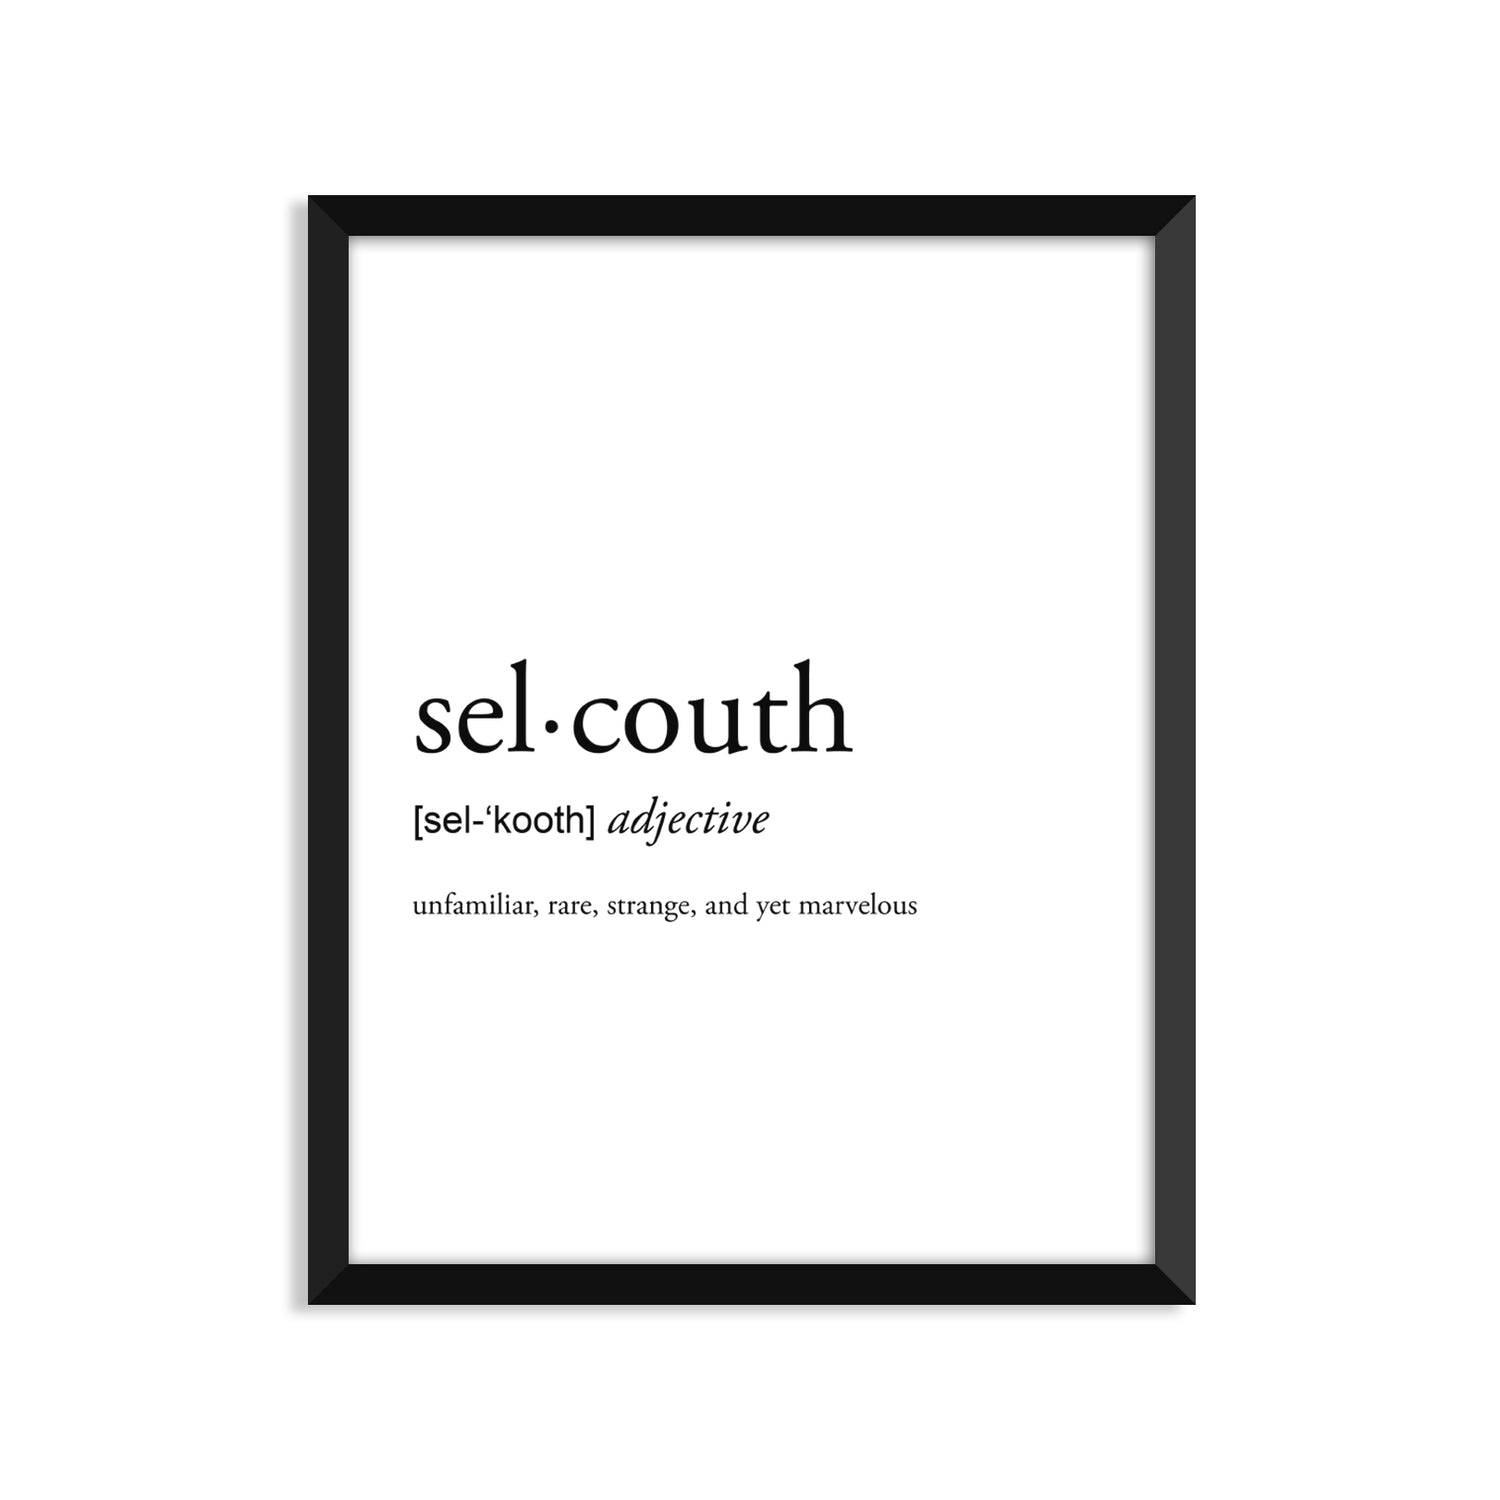 Selcouth Definition - Unframed Art Print Or Greeting Card